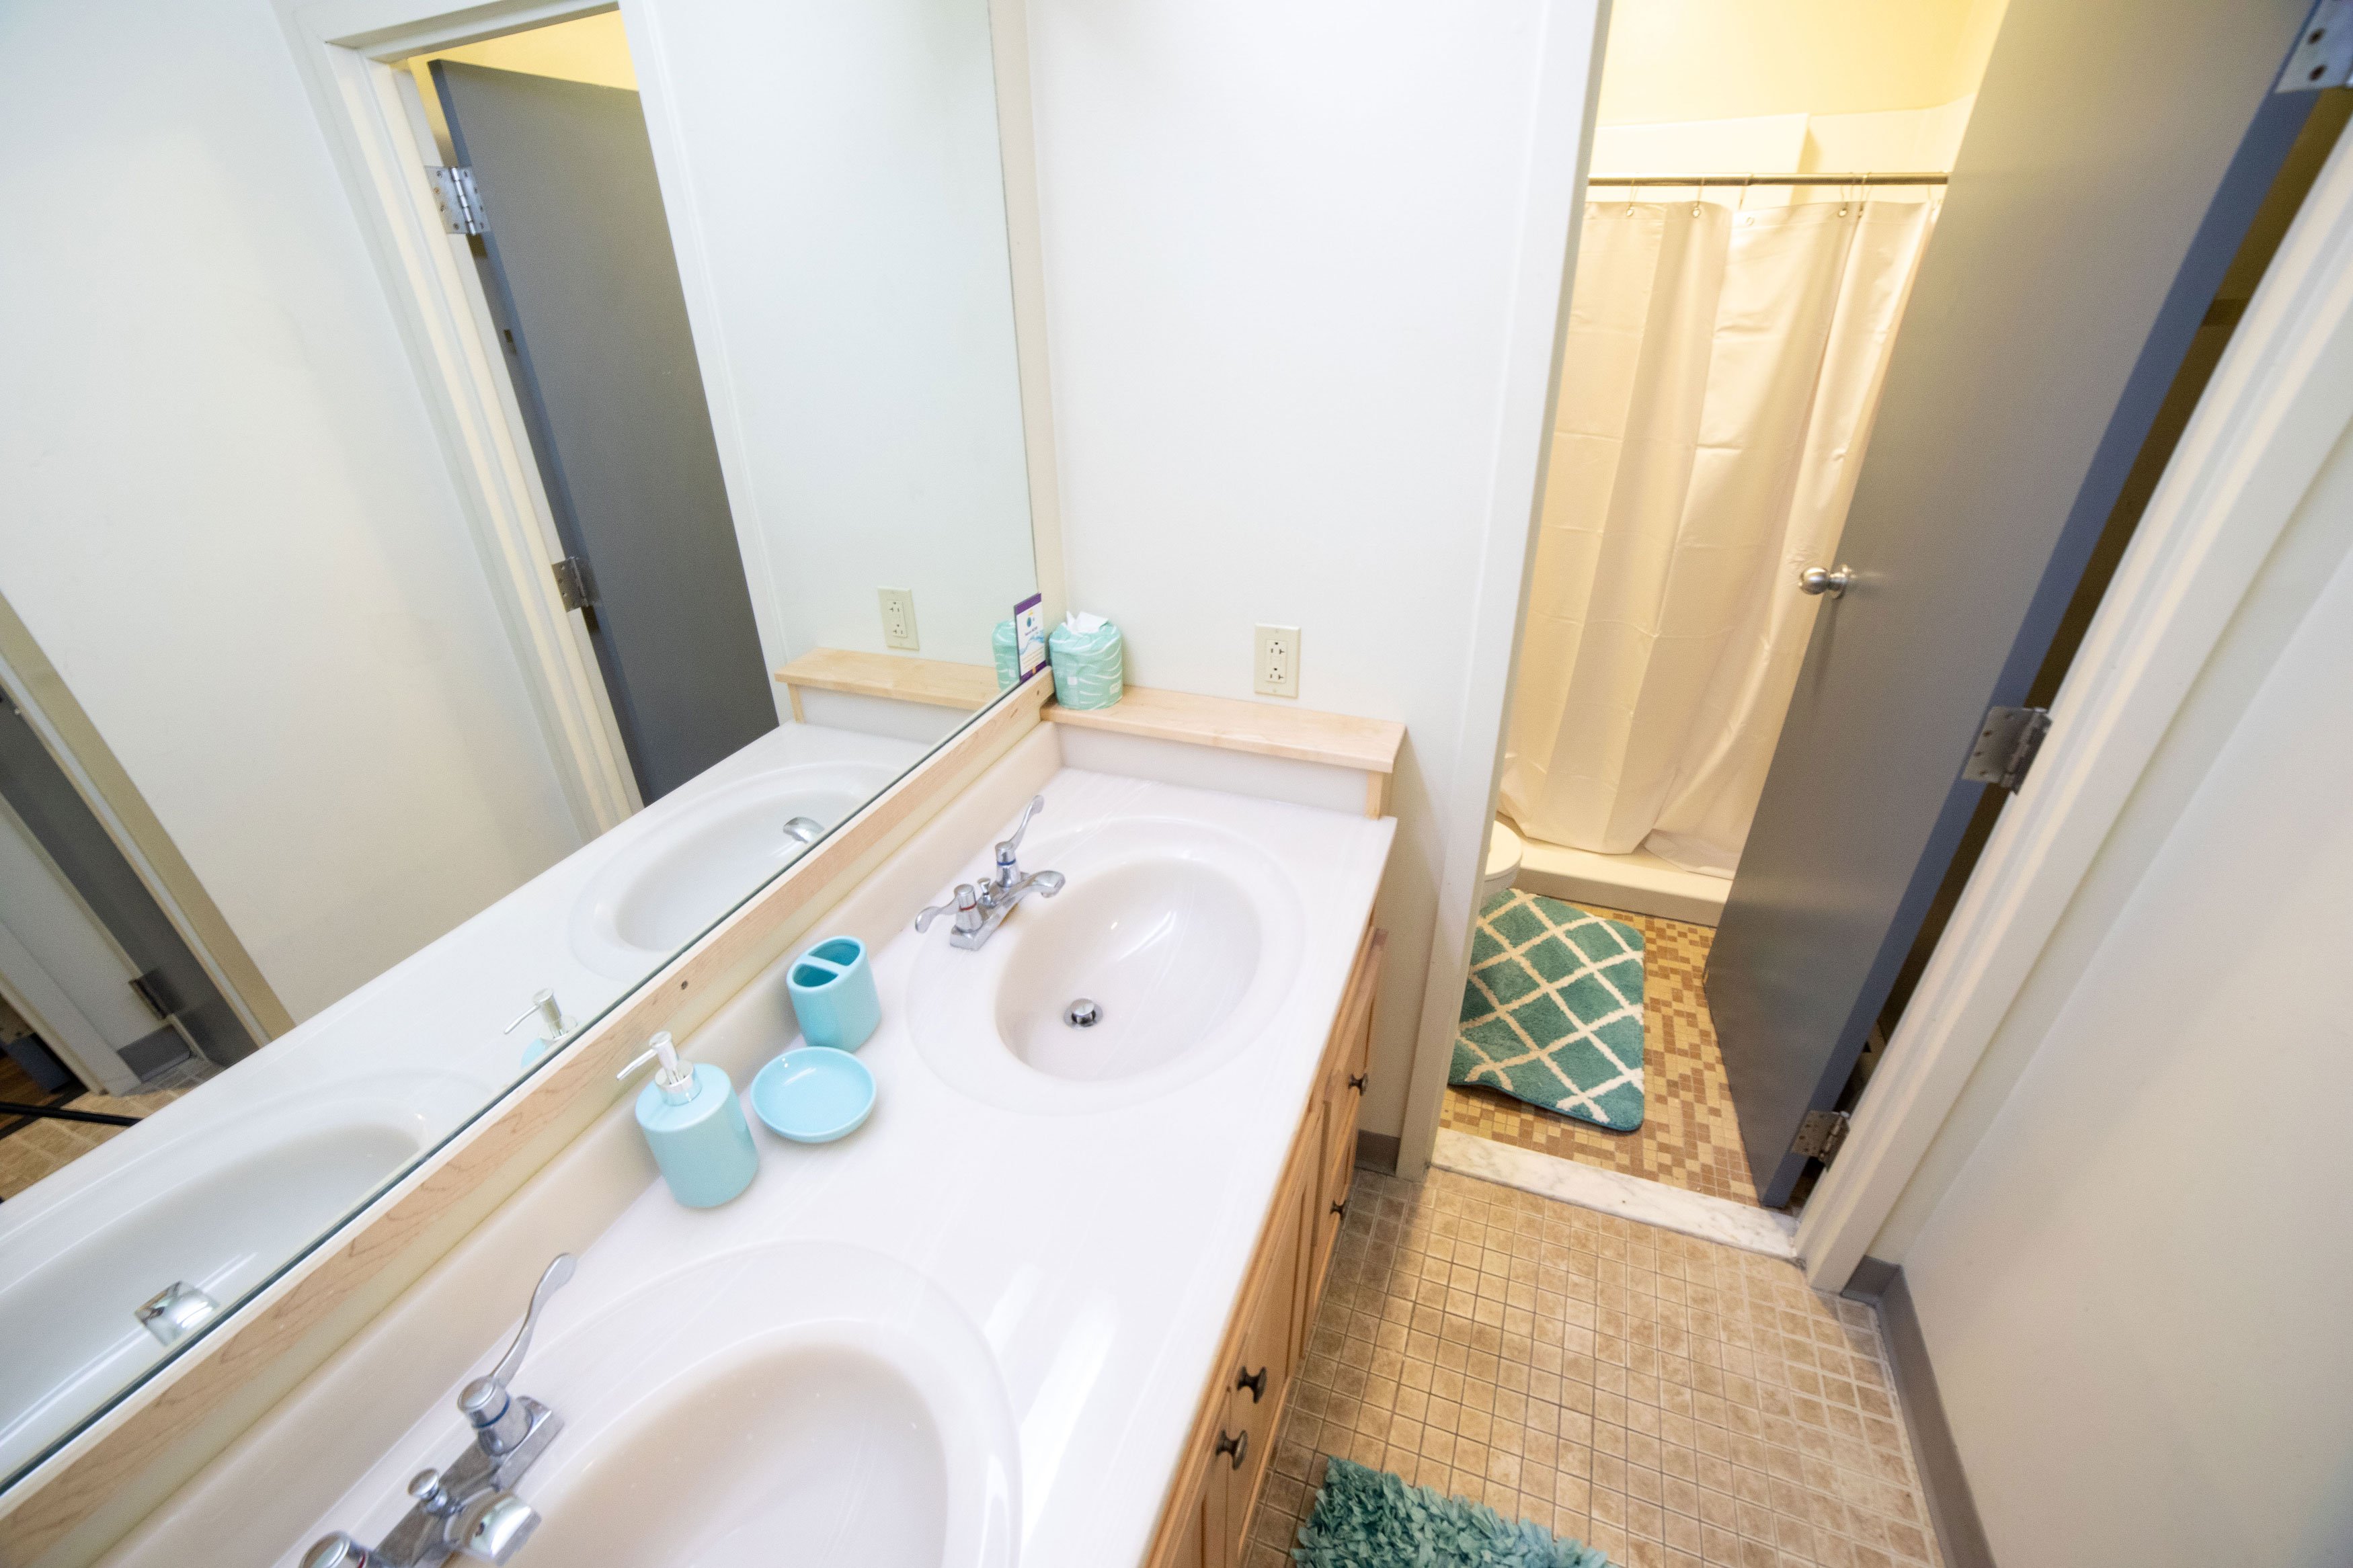 A two room bathroom, with a double sink and mirror in the first room and a toilet and shower in the second room.